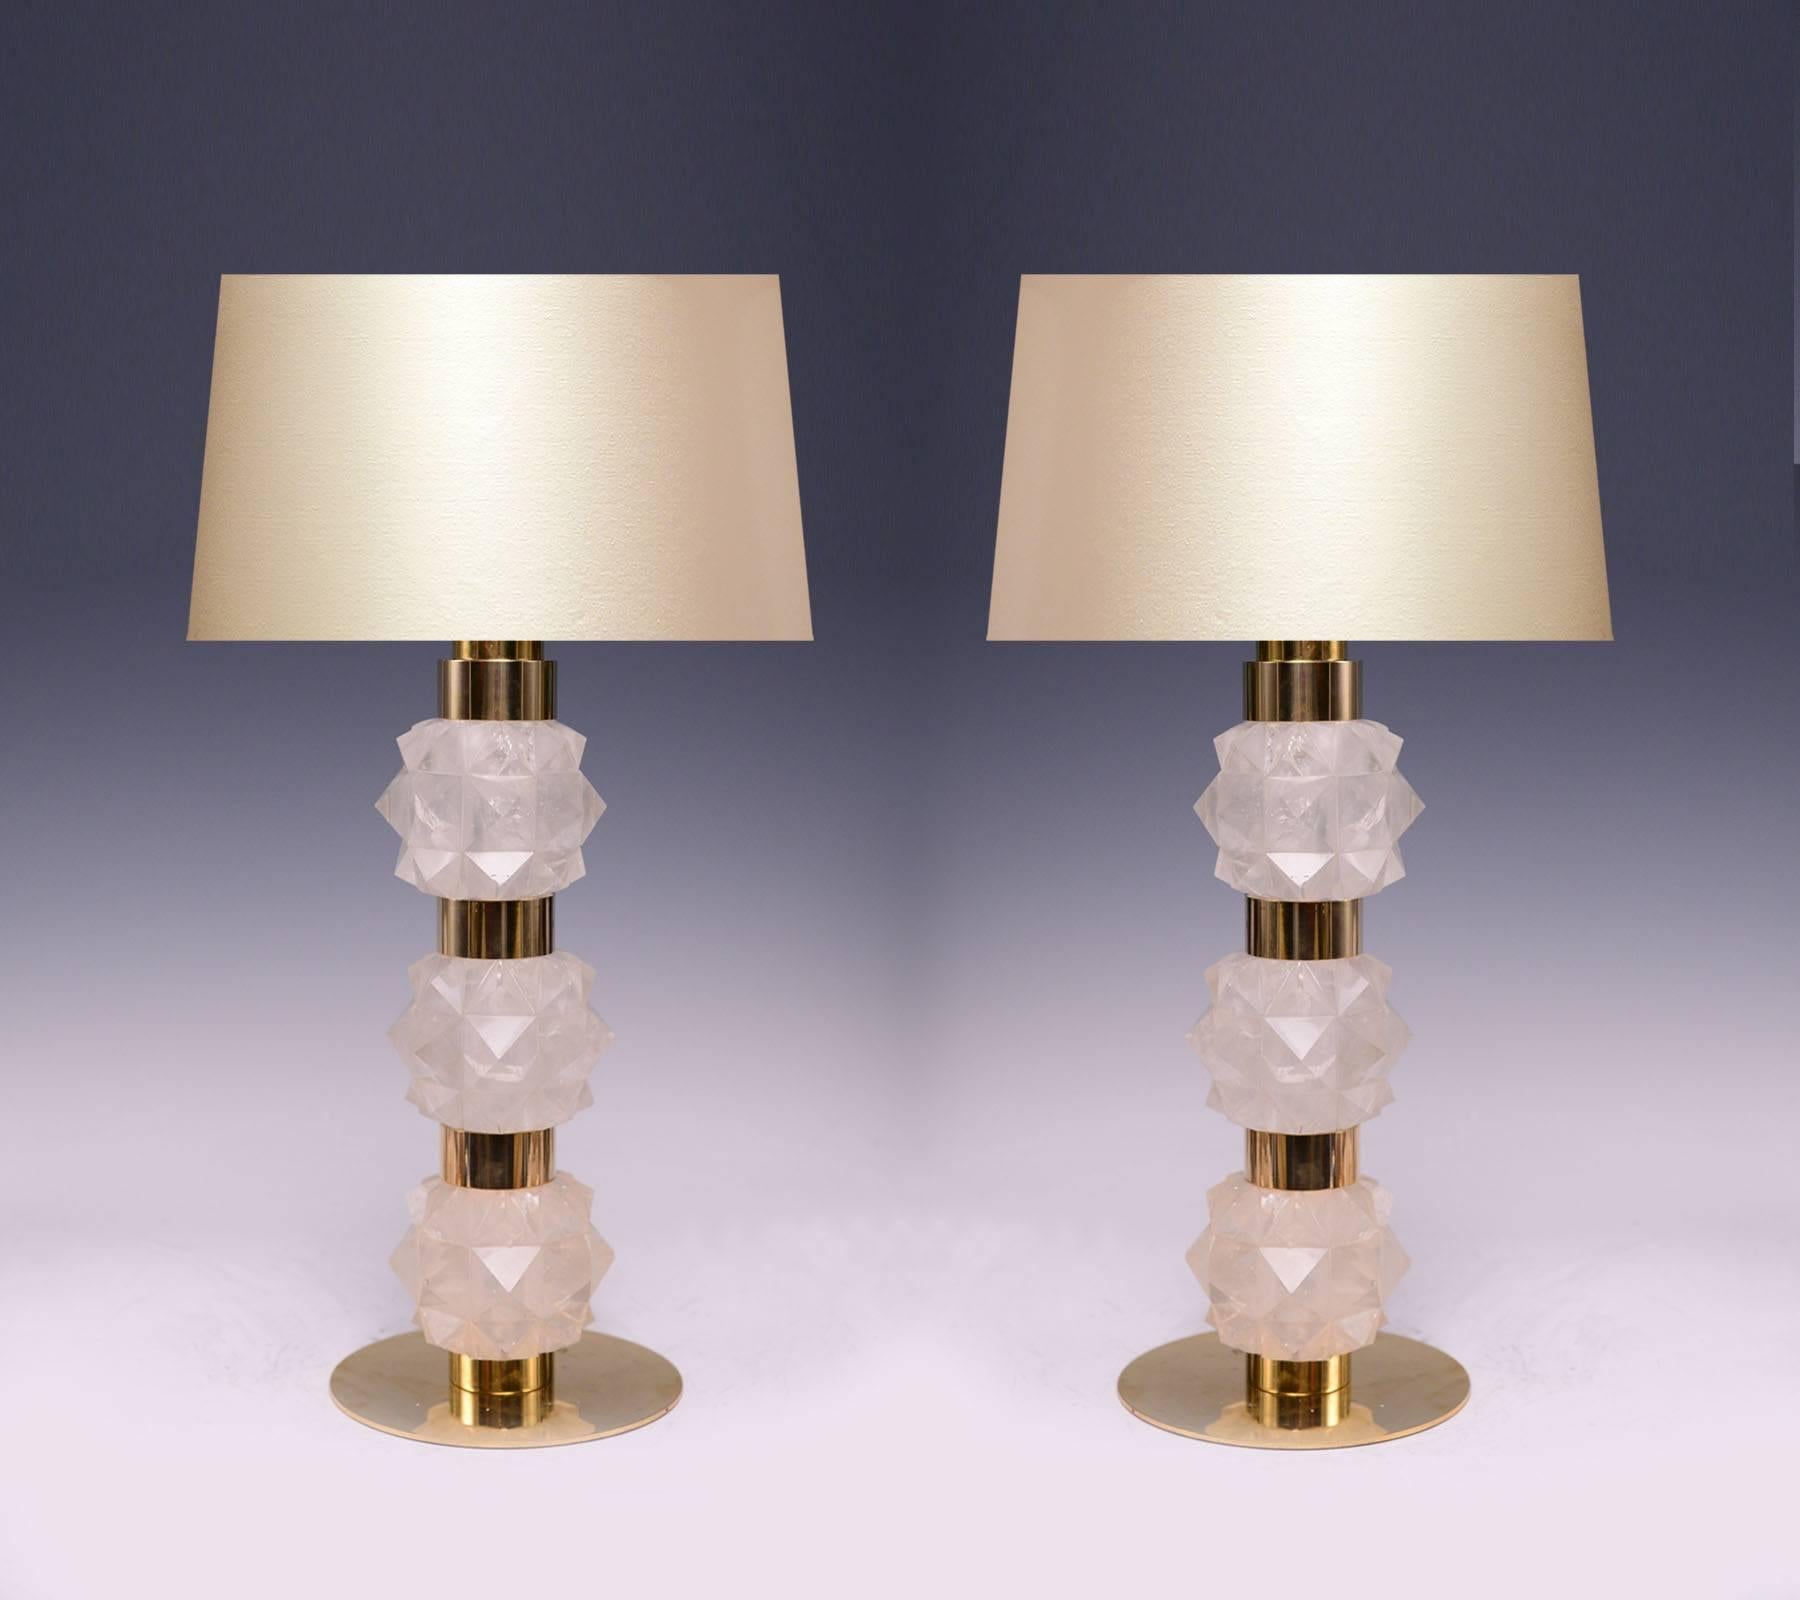 A pair of fine carved rock candy form rock crystal quartz lamps with polished brass decorations, created by Phoenix gallery.
Lampshade not included.
